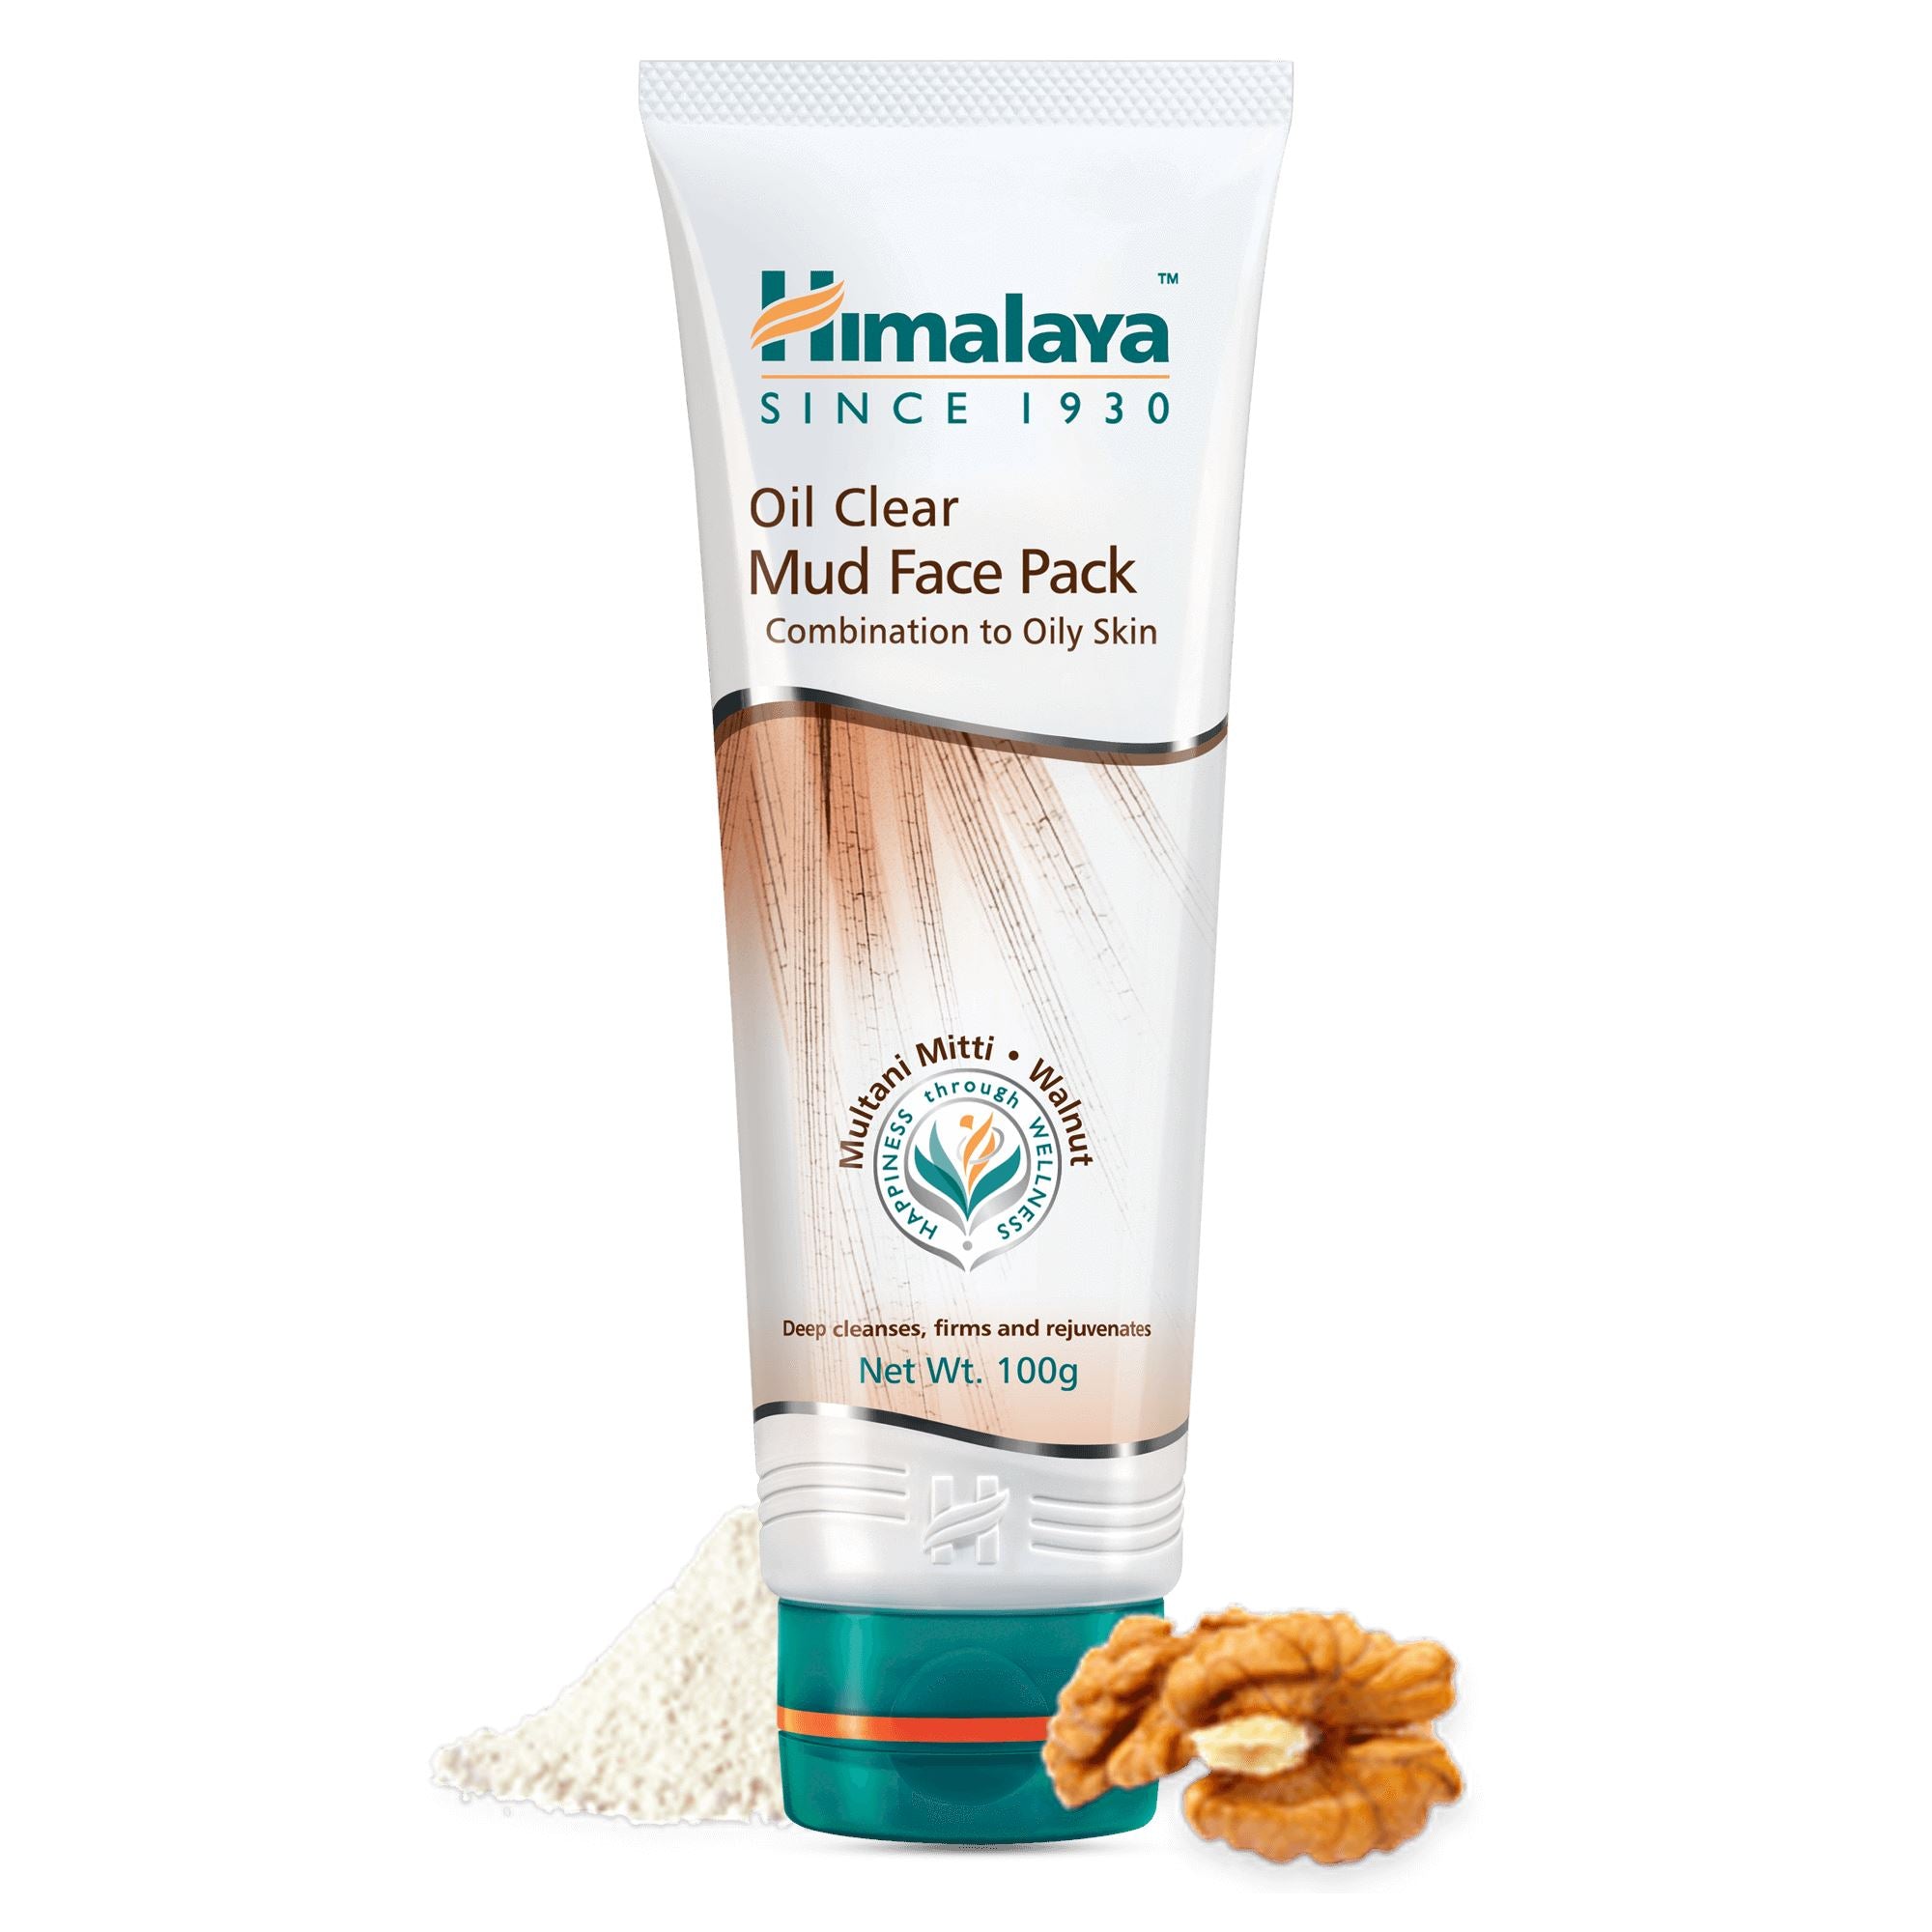 Himalaya Oil Clear Mud Face Pack - Deep cleanses, firms and rejuvenates